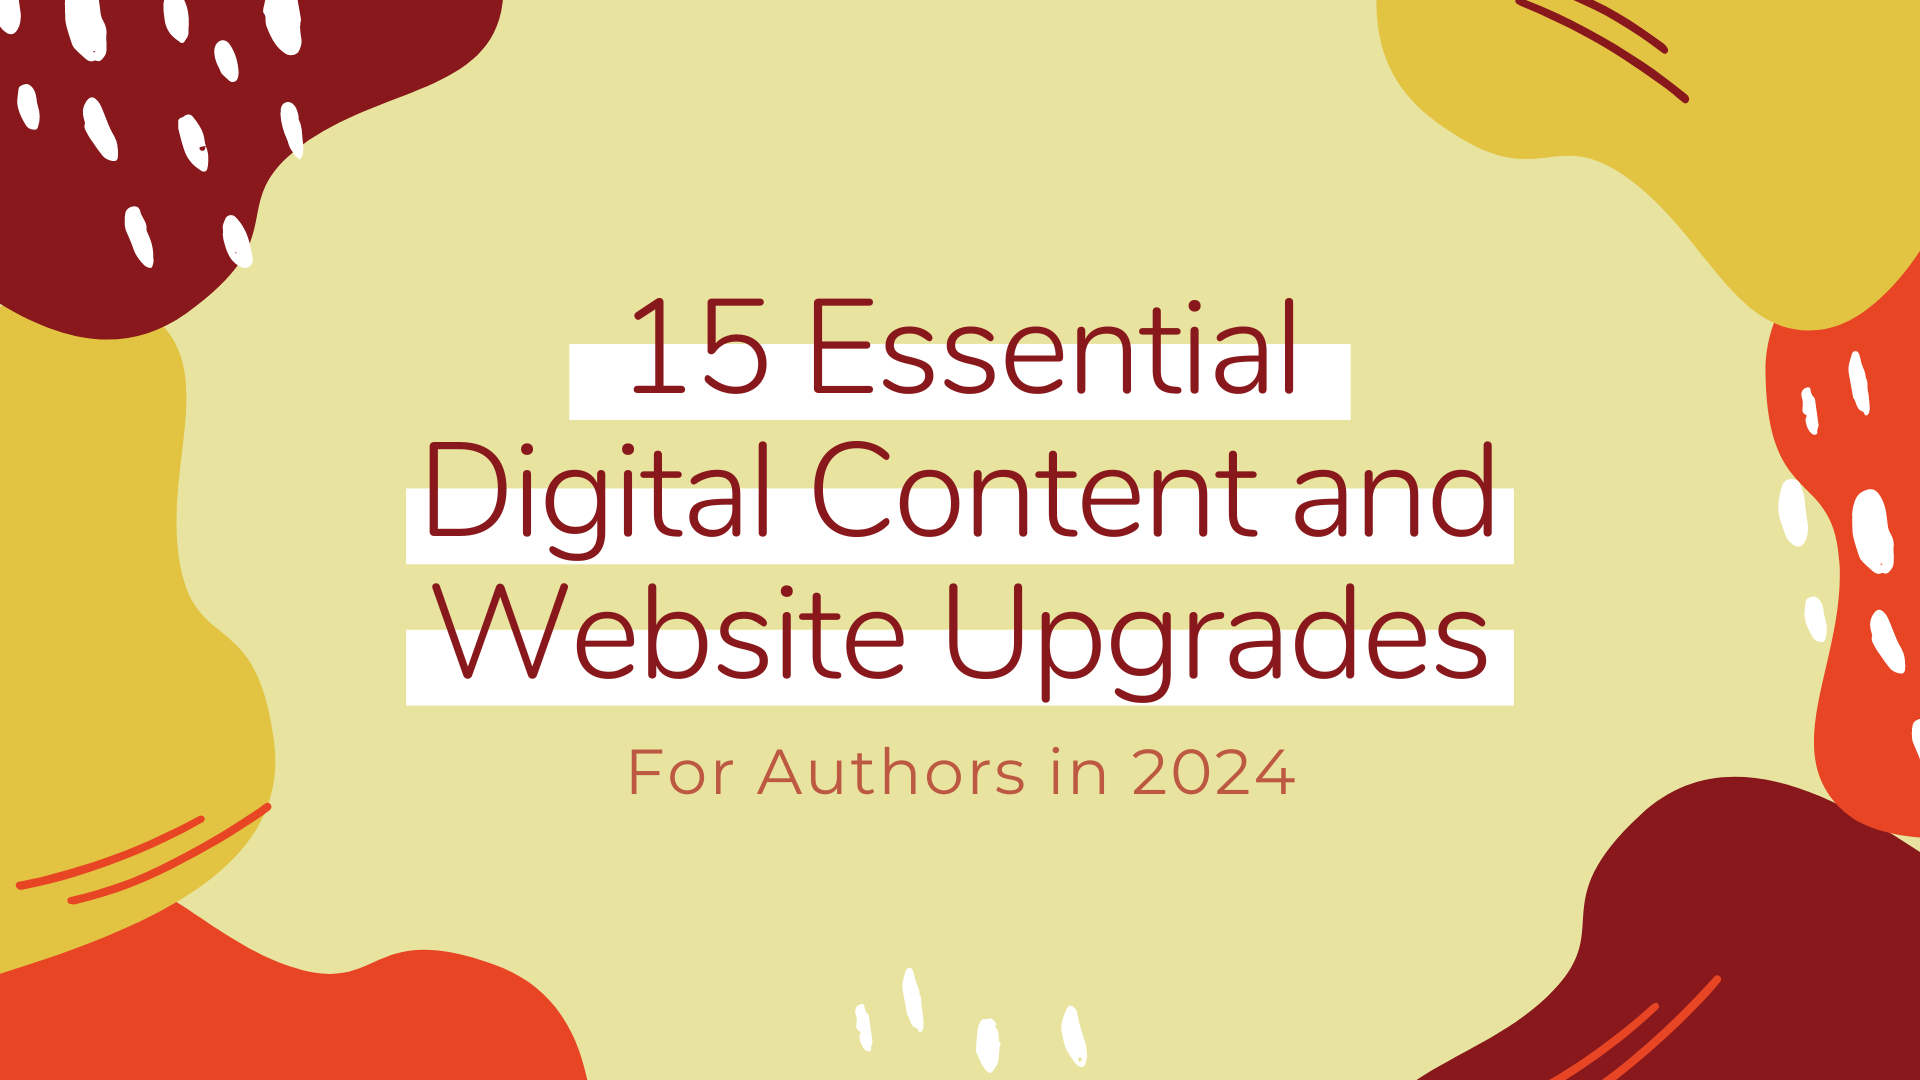 Dark words with white band underline 15 Essential Digital Content and Website Upgrades. Underneath the words For Authors in 2024 with blob shapes in orange and red and yellow around the words around the edge of the image.